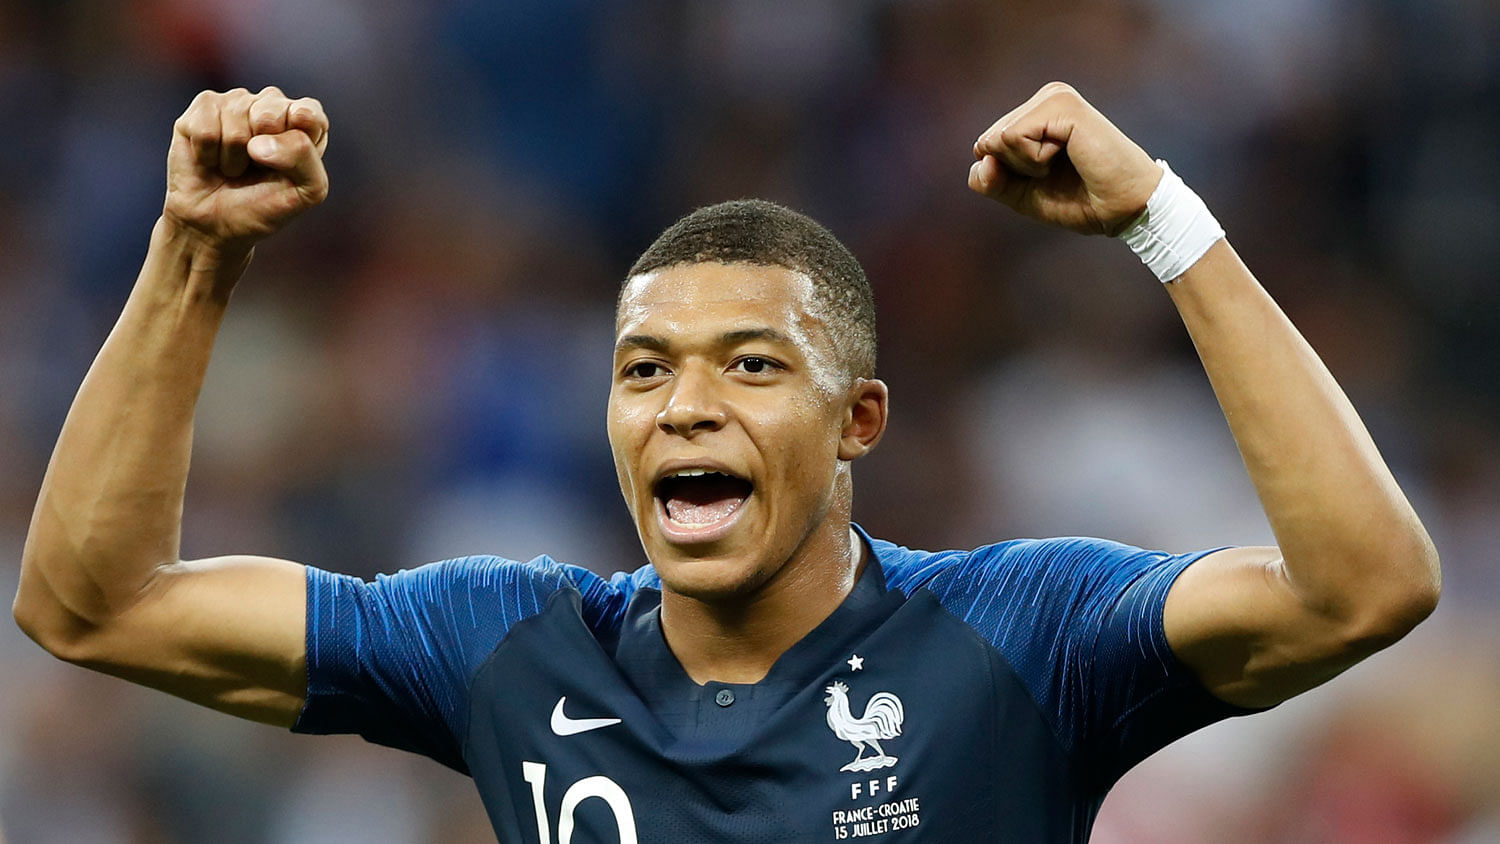 Kylian Mbappe was named the young player of the year at the FIFA World Cup 2018